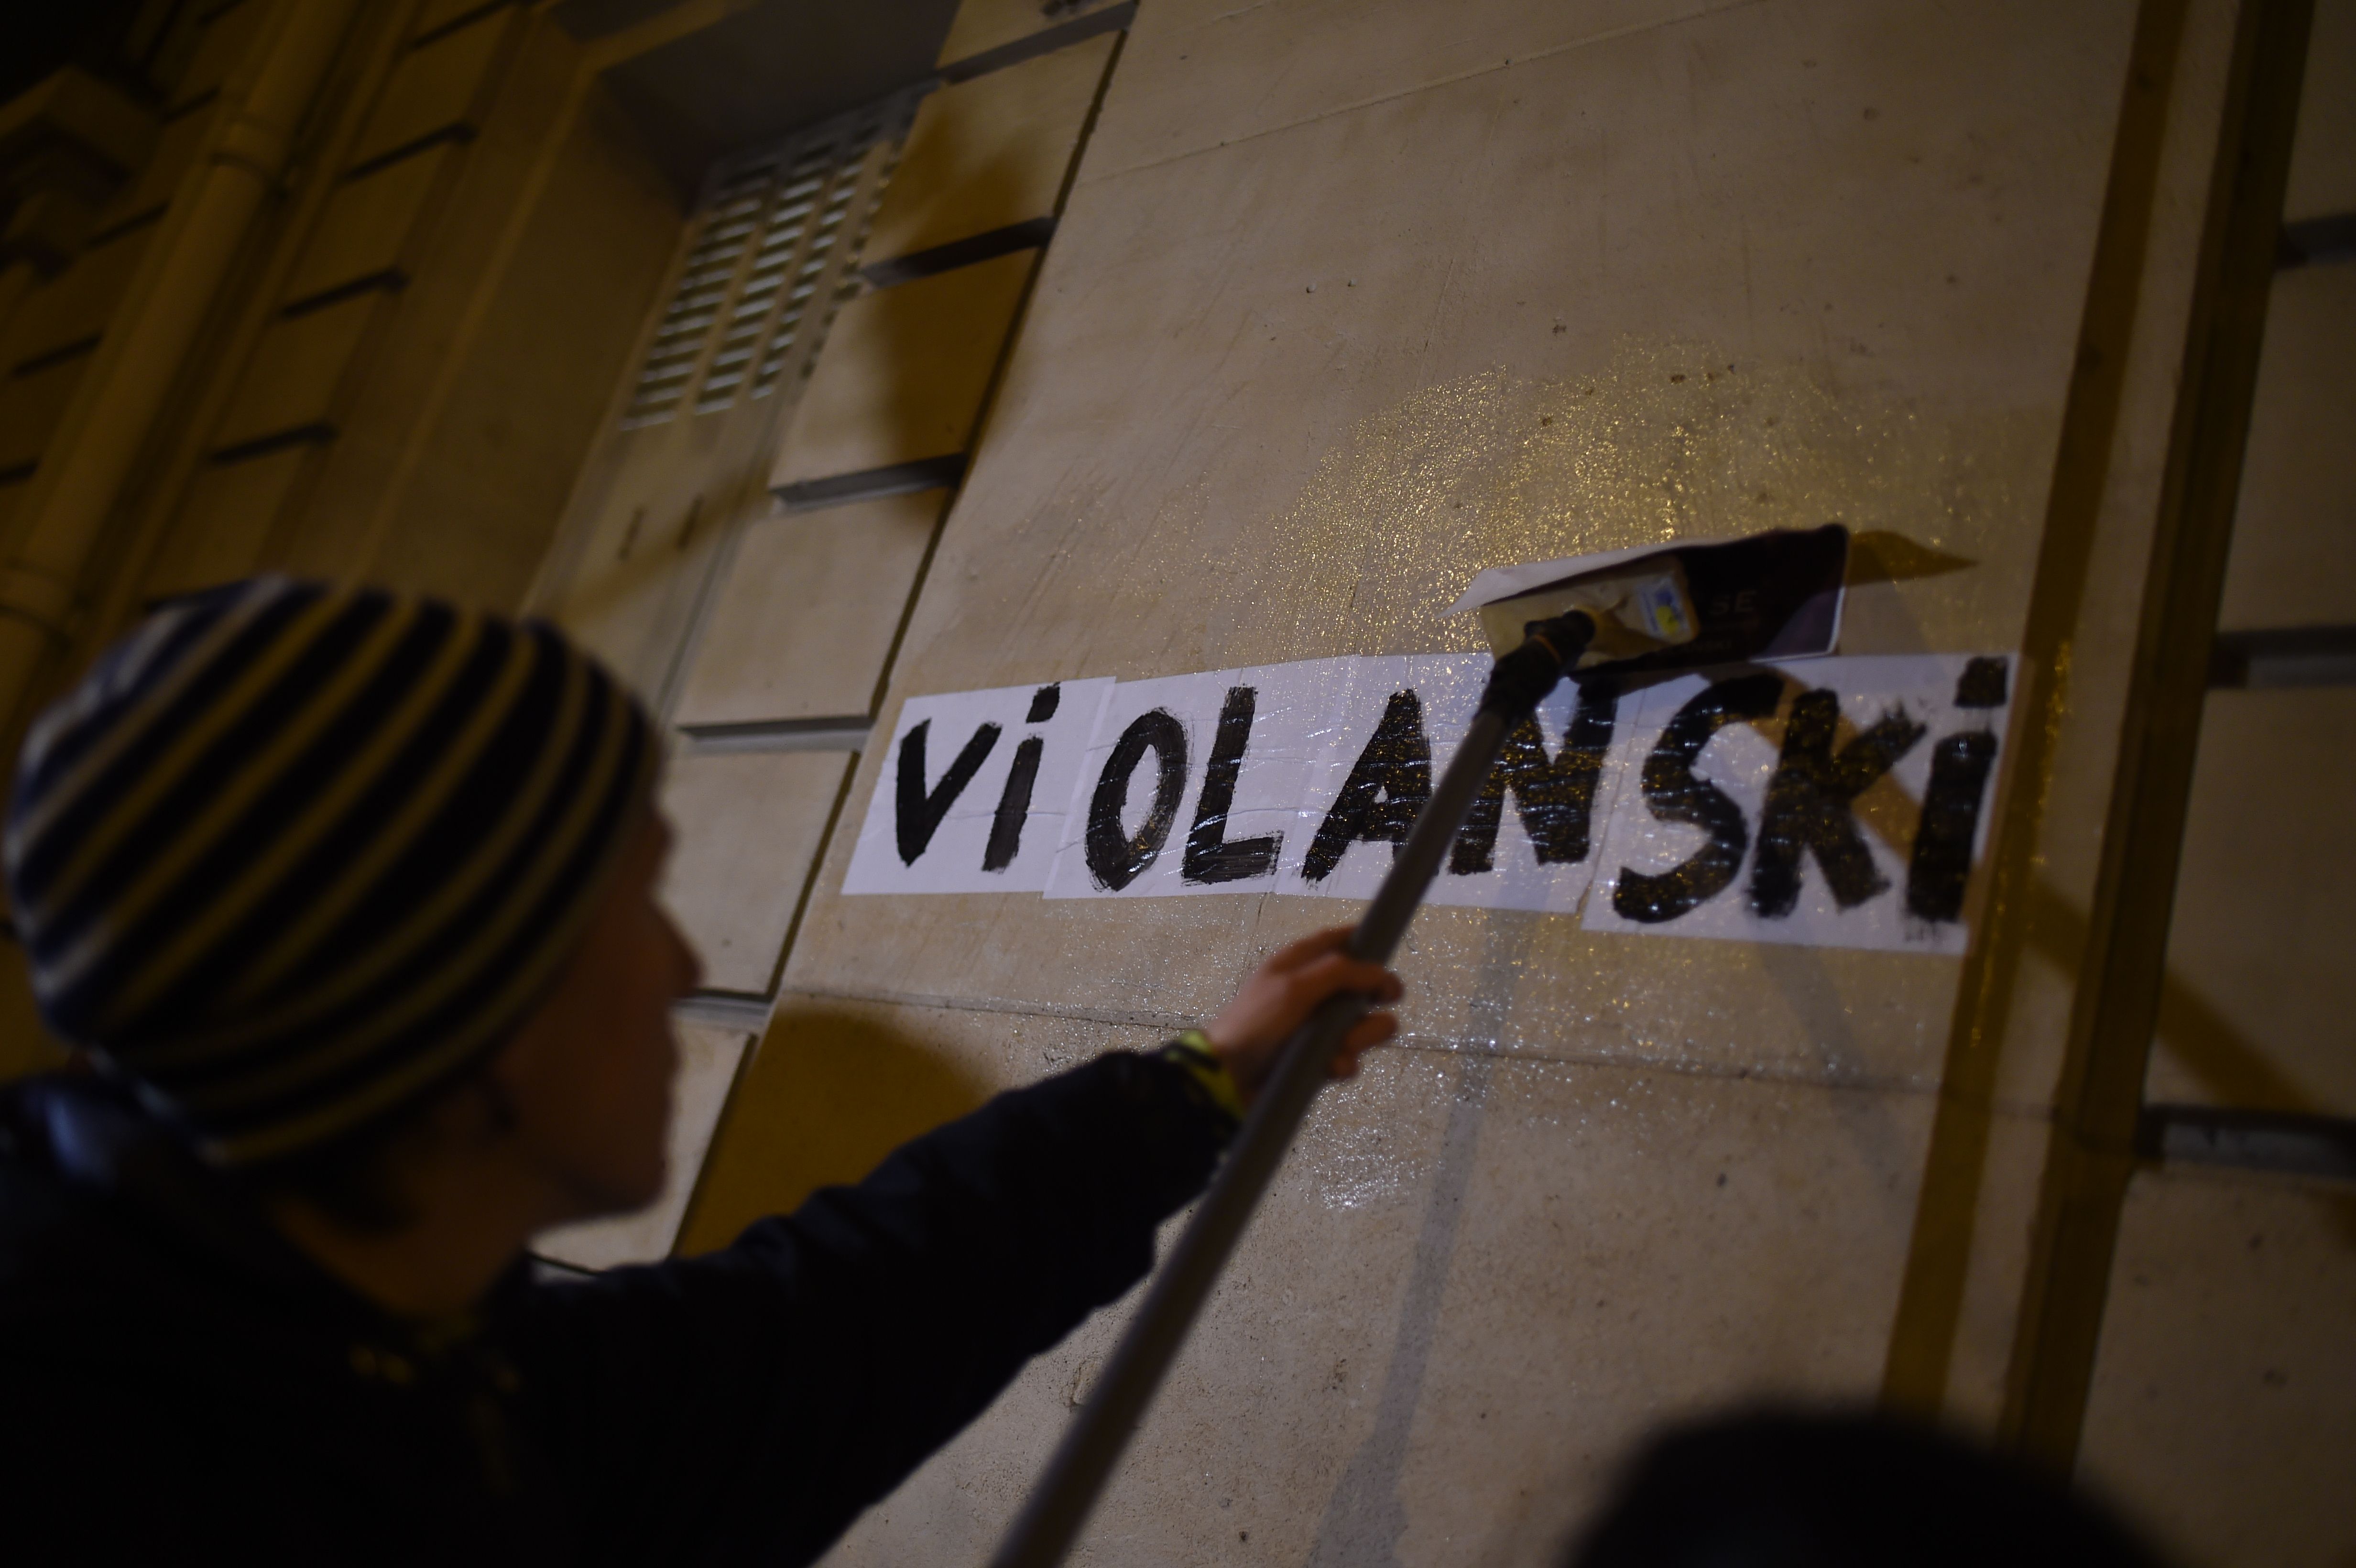 A feminist activist placards a poster with a play on words combining the word rape in French with the name of Polish-French filmmaker Roman Polanski near the Salle Pleyel venue, where the Cesar cinema awards ceremony is to be held the next day, on February 27, 2020, in Paris. - The academy organising France's Cesar awards is going through a crisis after the entire board resigned amid calls for reform and a row over the long-running Roman Polanski scandal. The Cesar Academy has been under fire since the end of January after Roman Polanski's film "An Officer and a Spy" (J'accuse) topped the list of nominations for this year's Cesar awards, due to be handed out on February 28. Polanski told AFP on February 27, 2020, he would not attend the ceremony French Oscars because he fears a "public lynching" by feminist activists. (Photo by LUCAS BARIOULET/AFP via Getty Images)